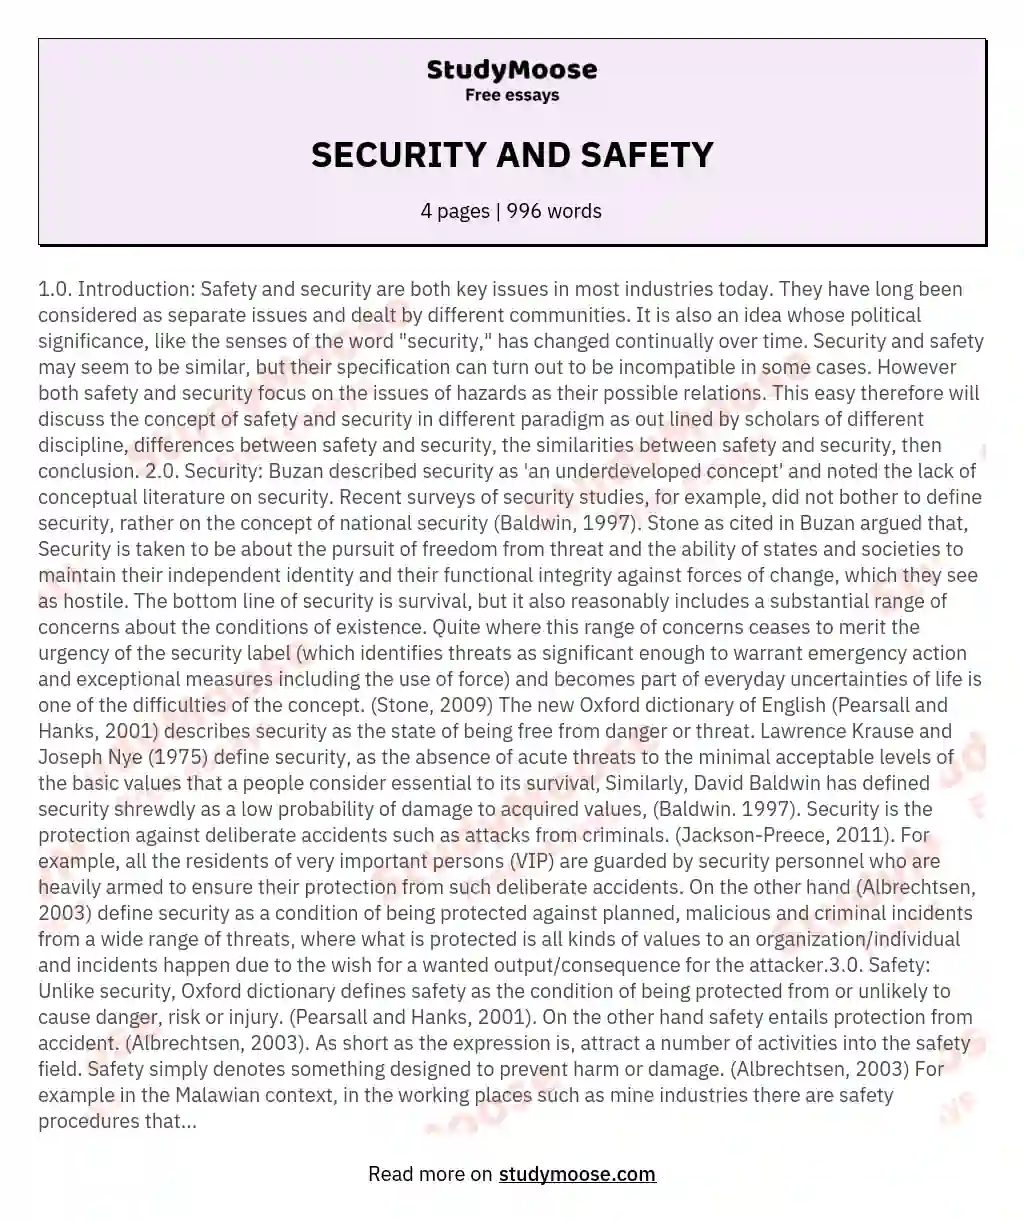 SECURITY AND SAFETY essay